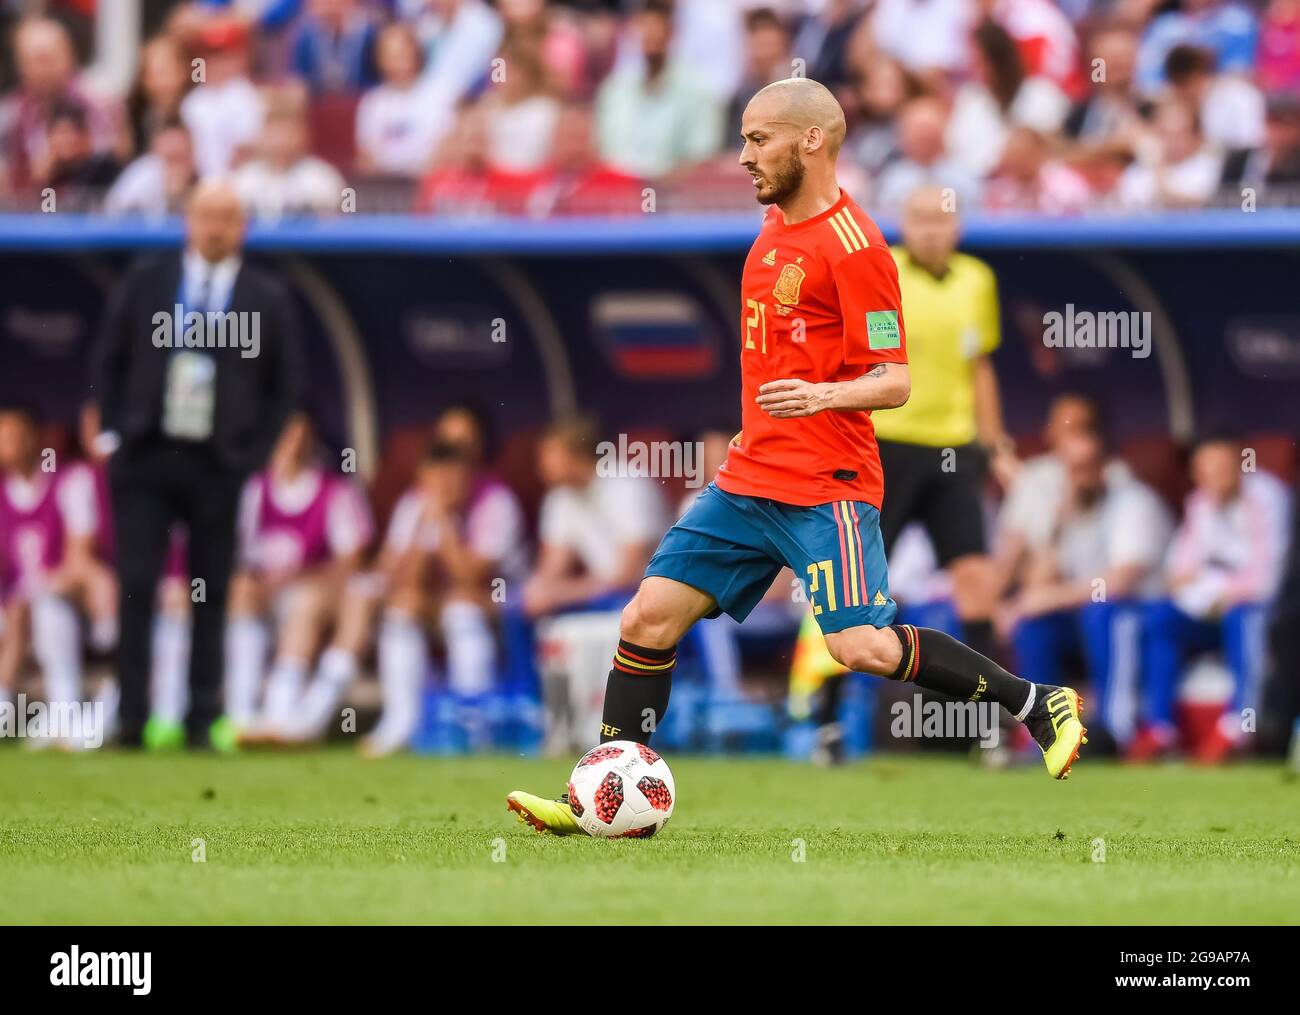 Moscow, Russia - July 1, 2018. Spain national football team midfielder David Silva during FIFA World Cup 2018 Round of 16 match Spain vs Russia. Stock Photo